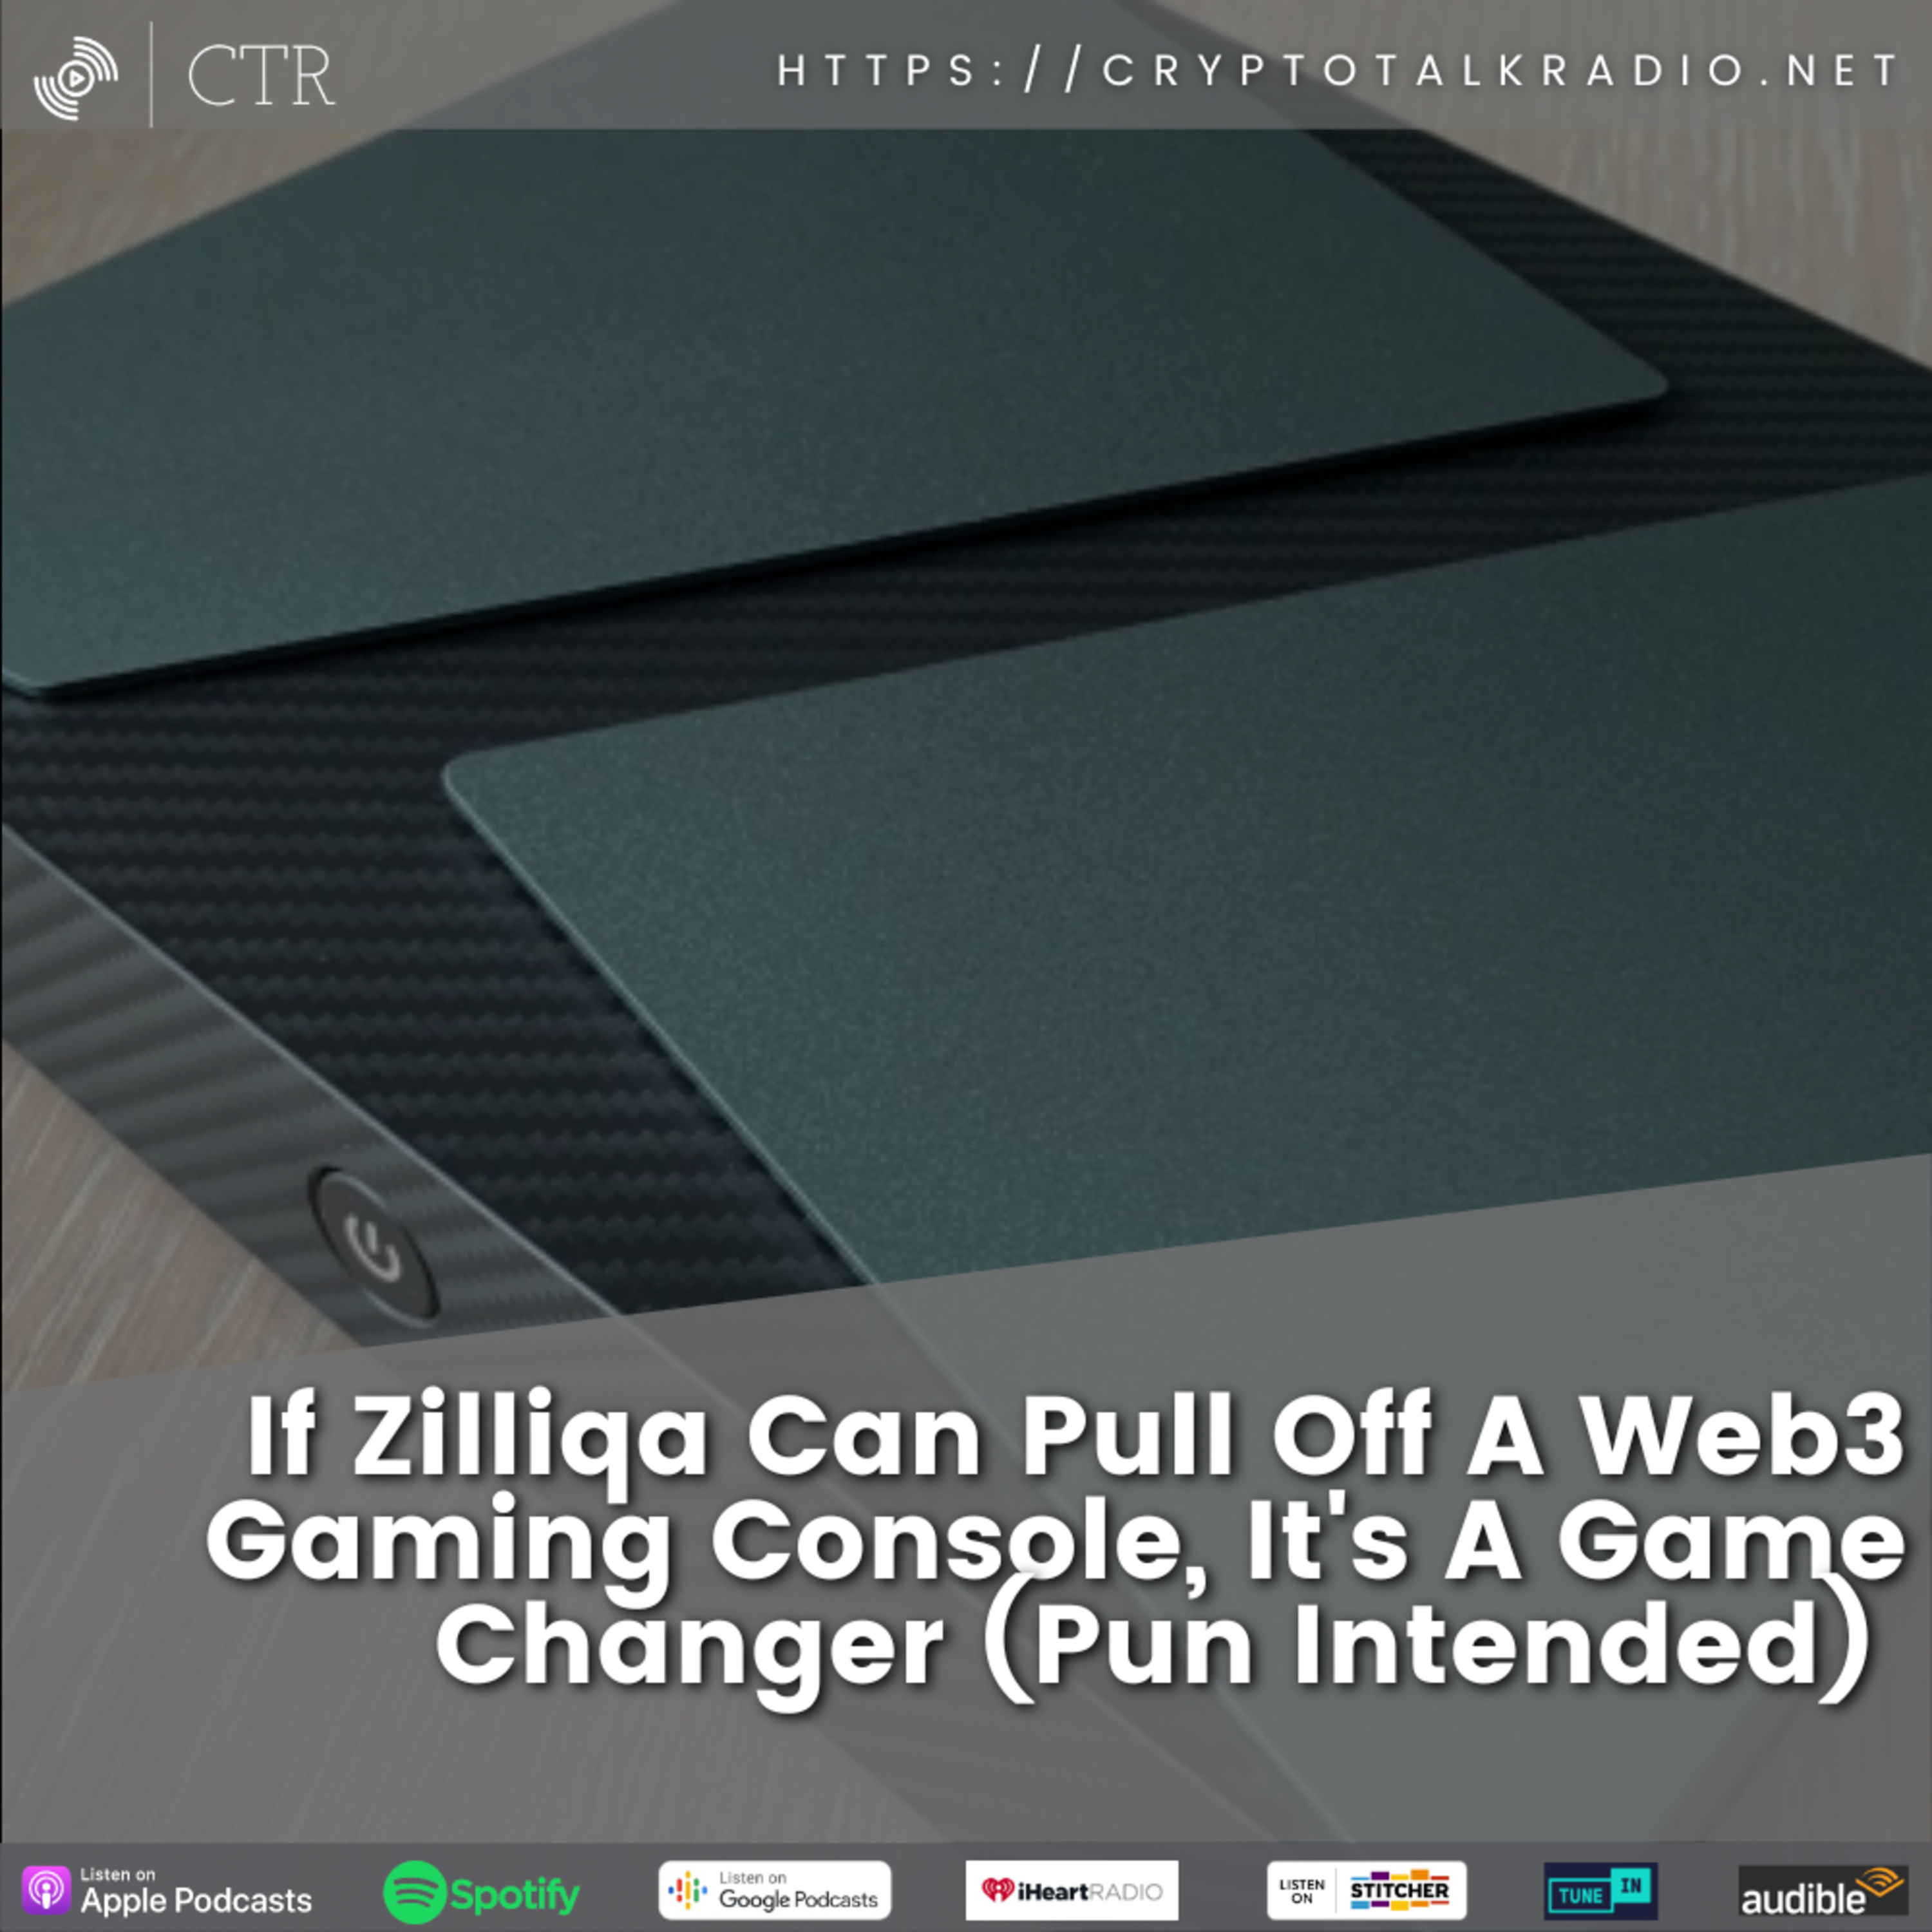 If #Zilliqa Can Pull Off A Web3 Gaming Console, It's A Game Changer (Pun Intended)